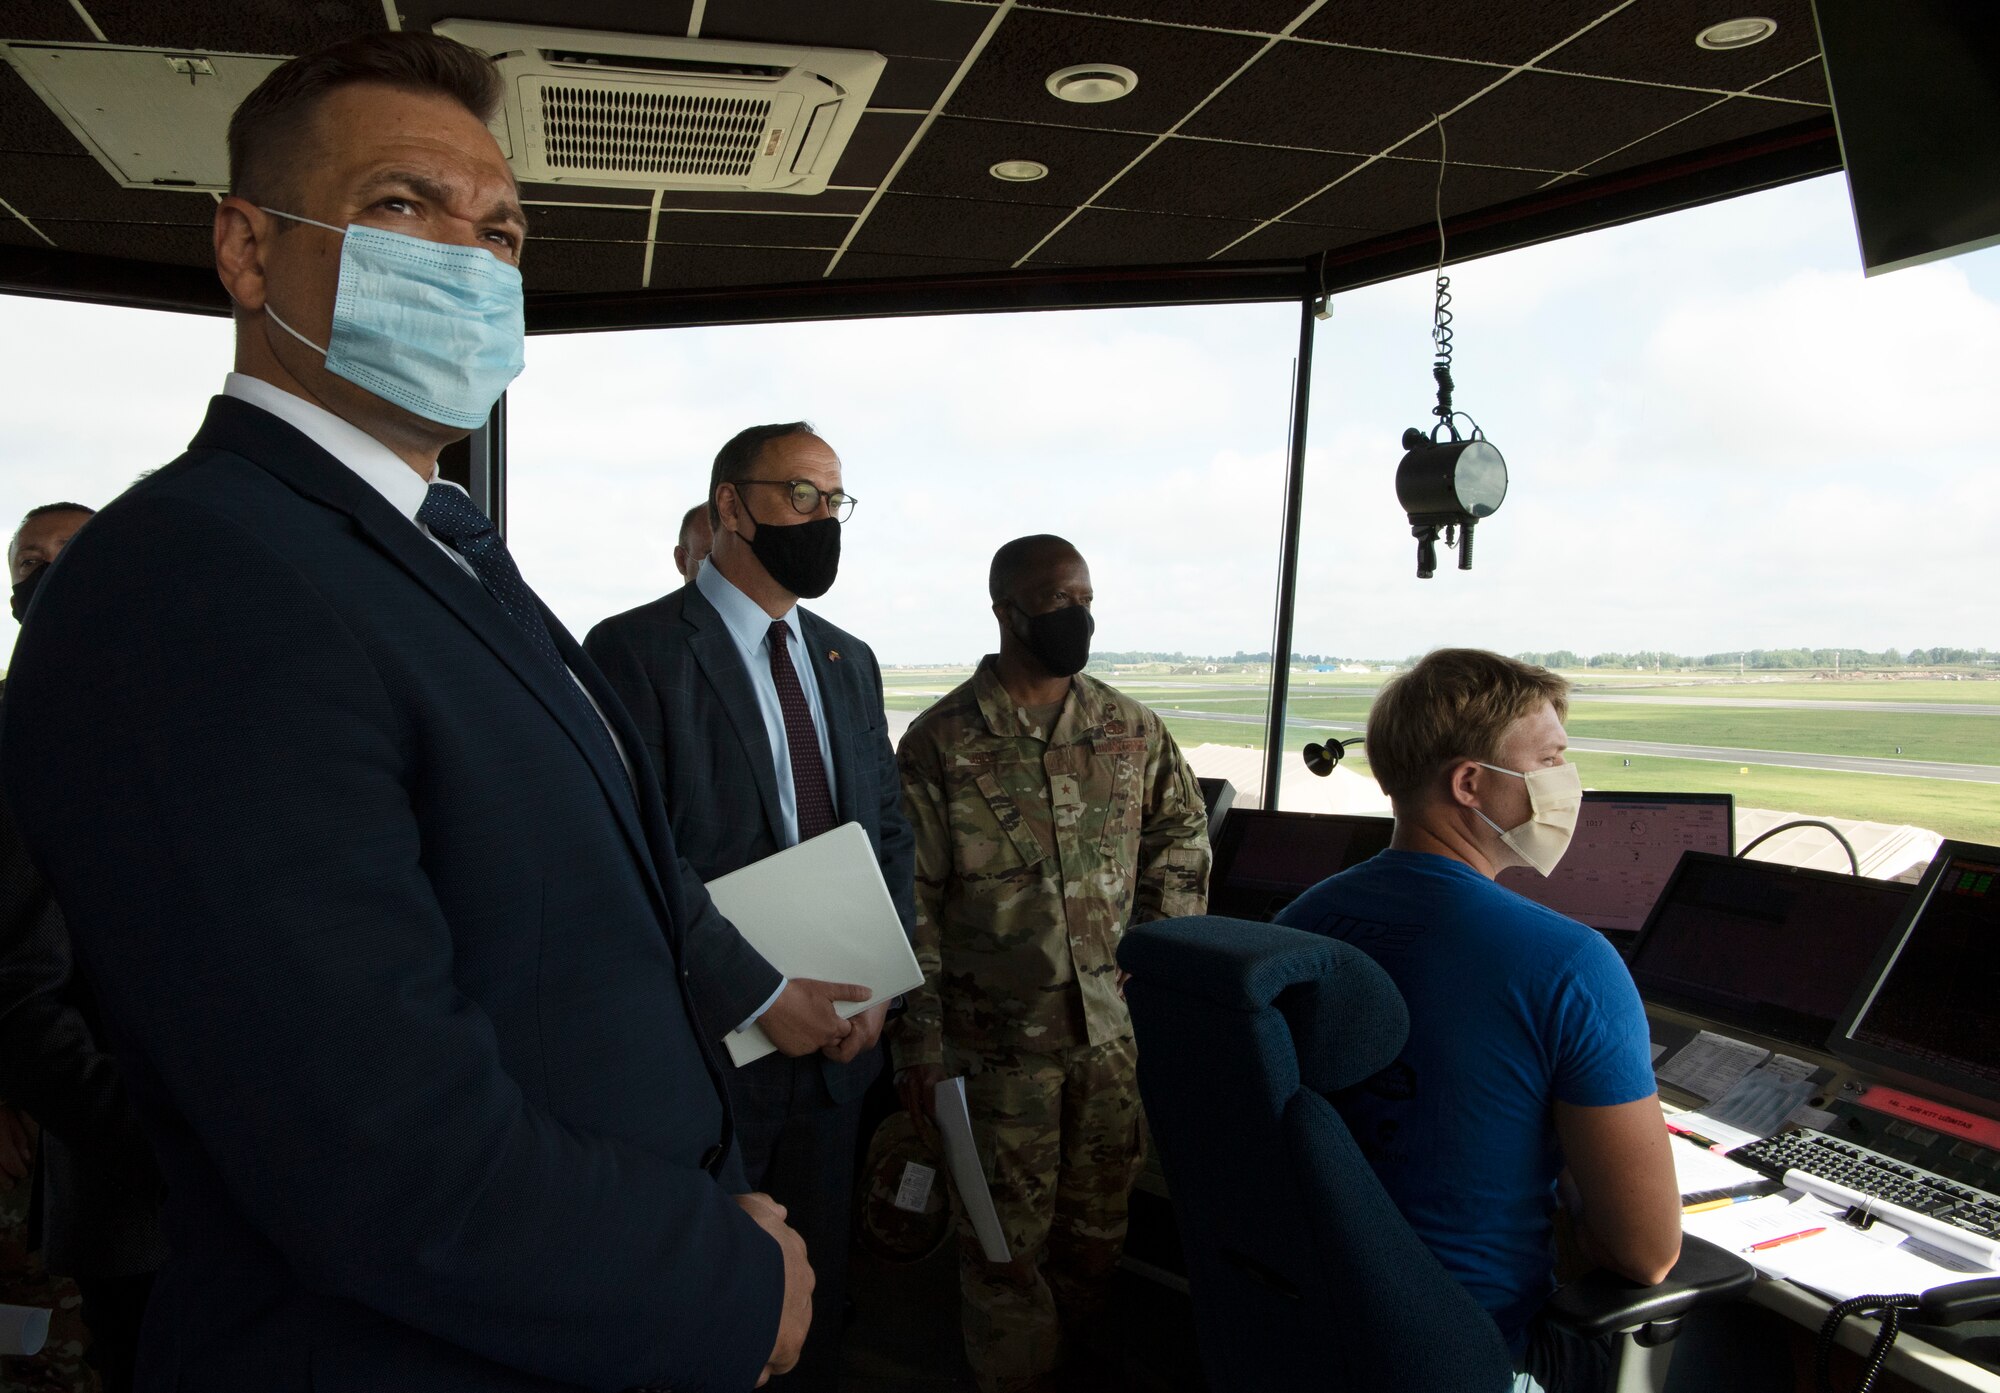 During a tour of the base, leaders visited the squadron operations building, air traffic control tower, and a hangar